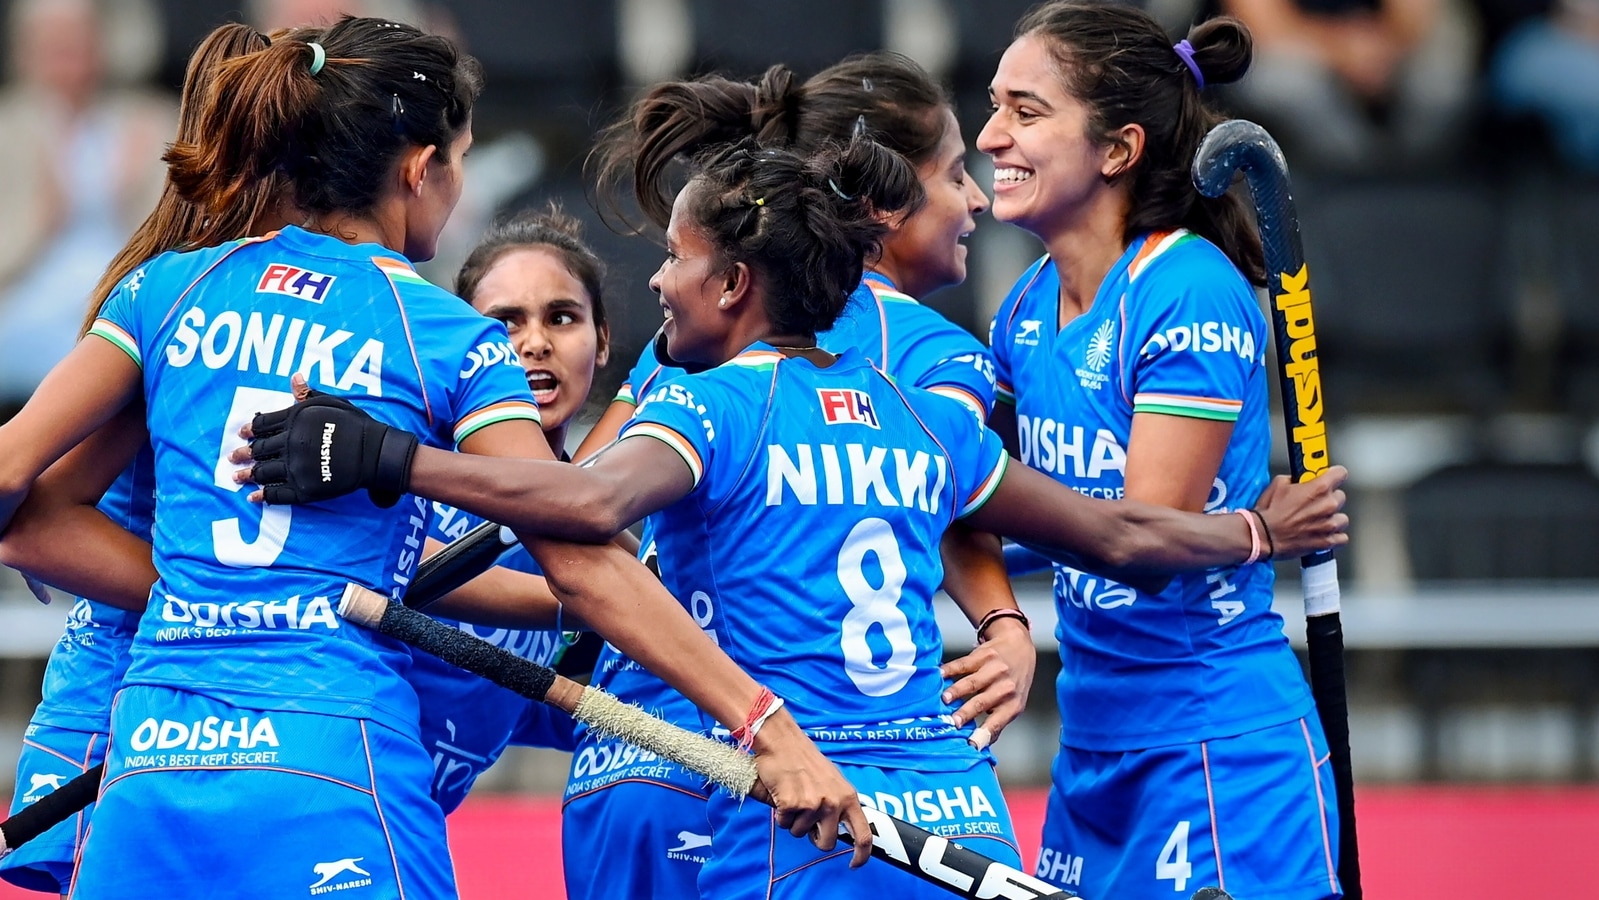 India end FIH Hockey Pro League campaign with 2-1 win against Argentina